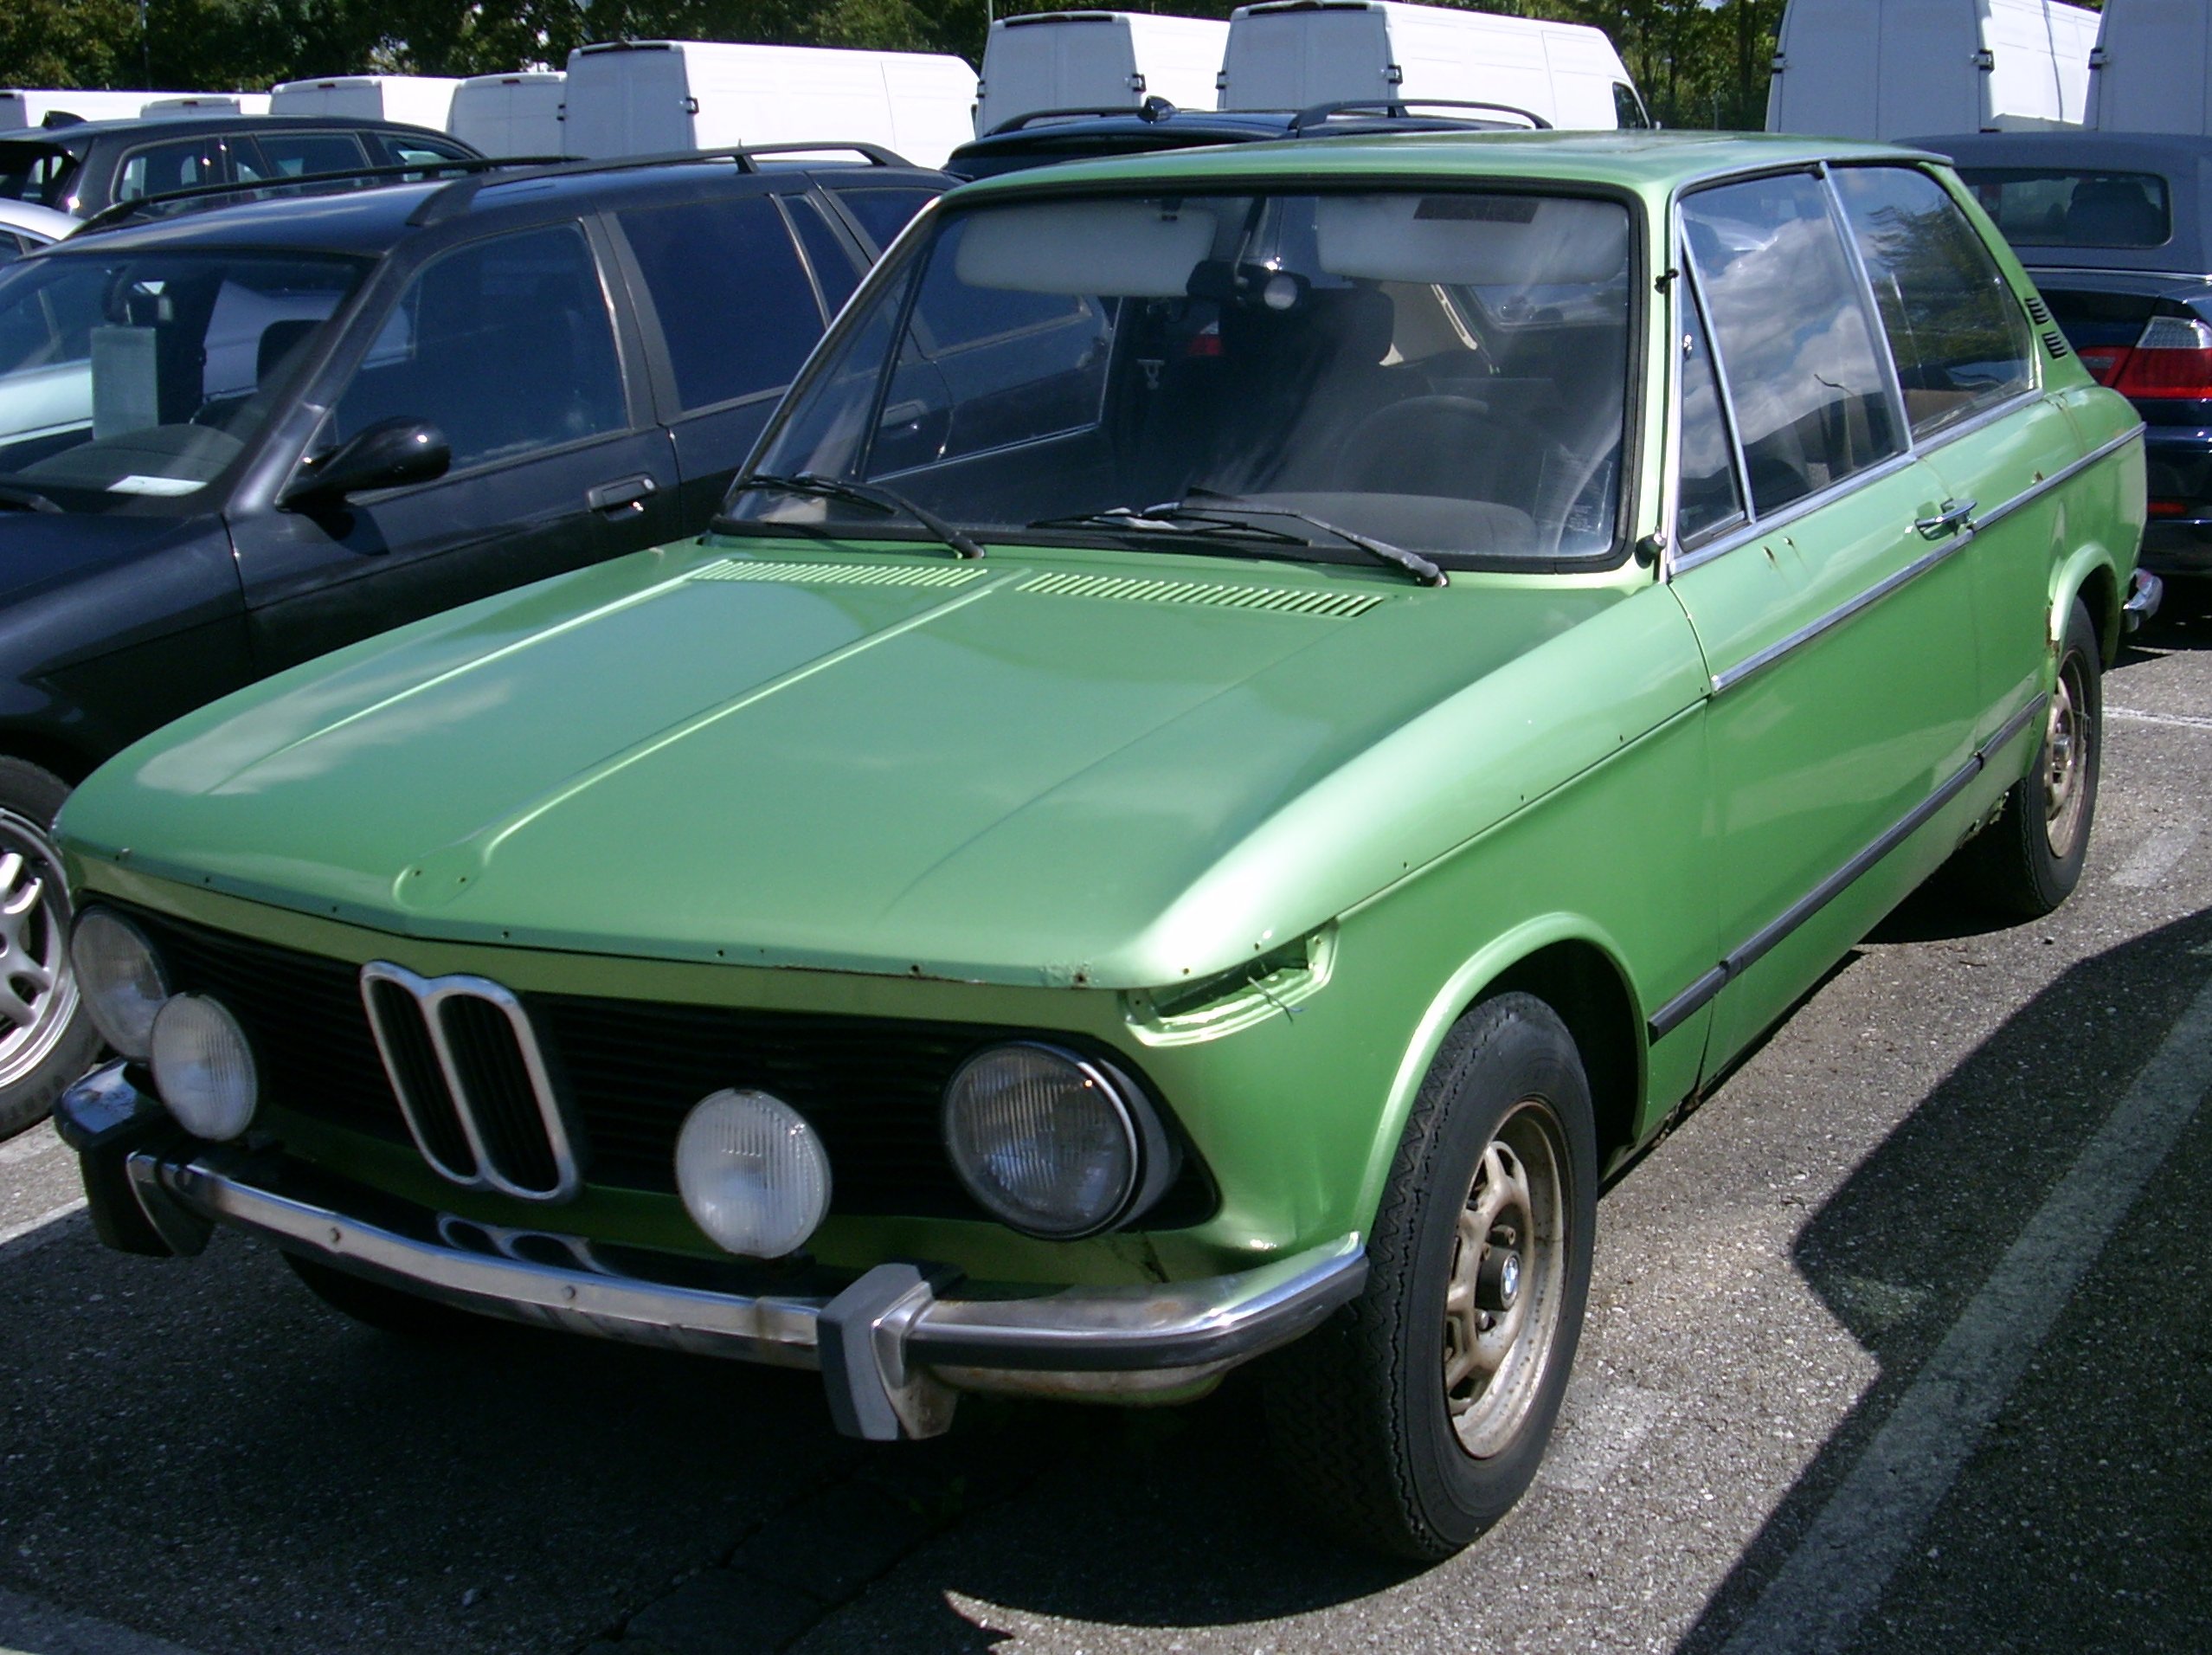 BMW 2002 tii touring 1971-74 | Flickr - Photo Sharing!